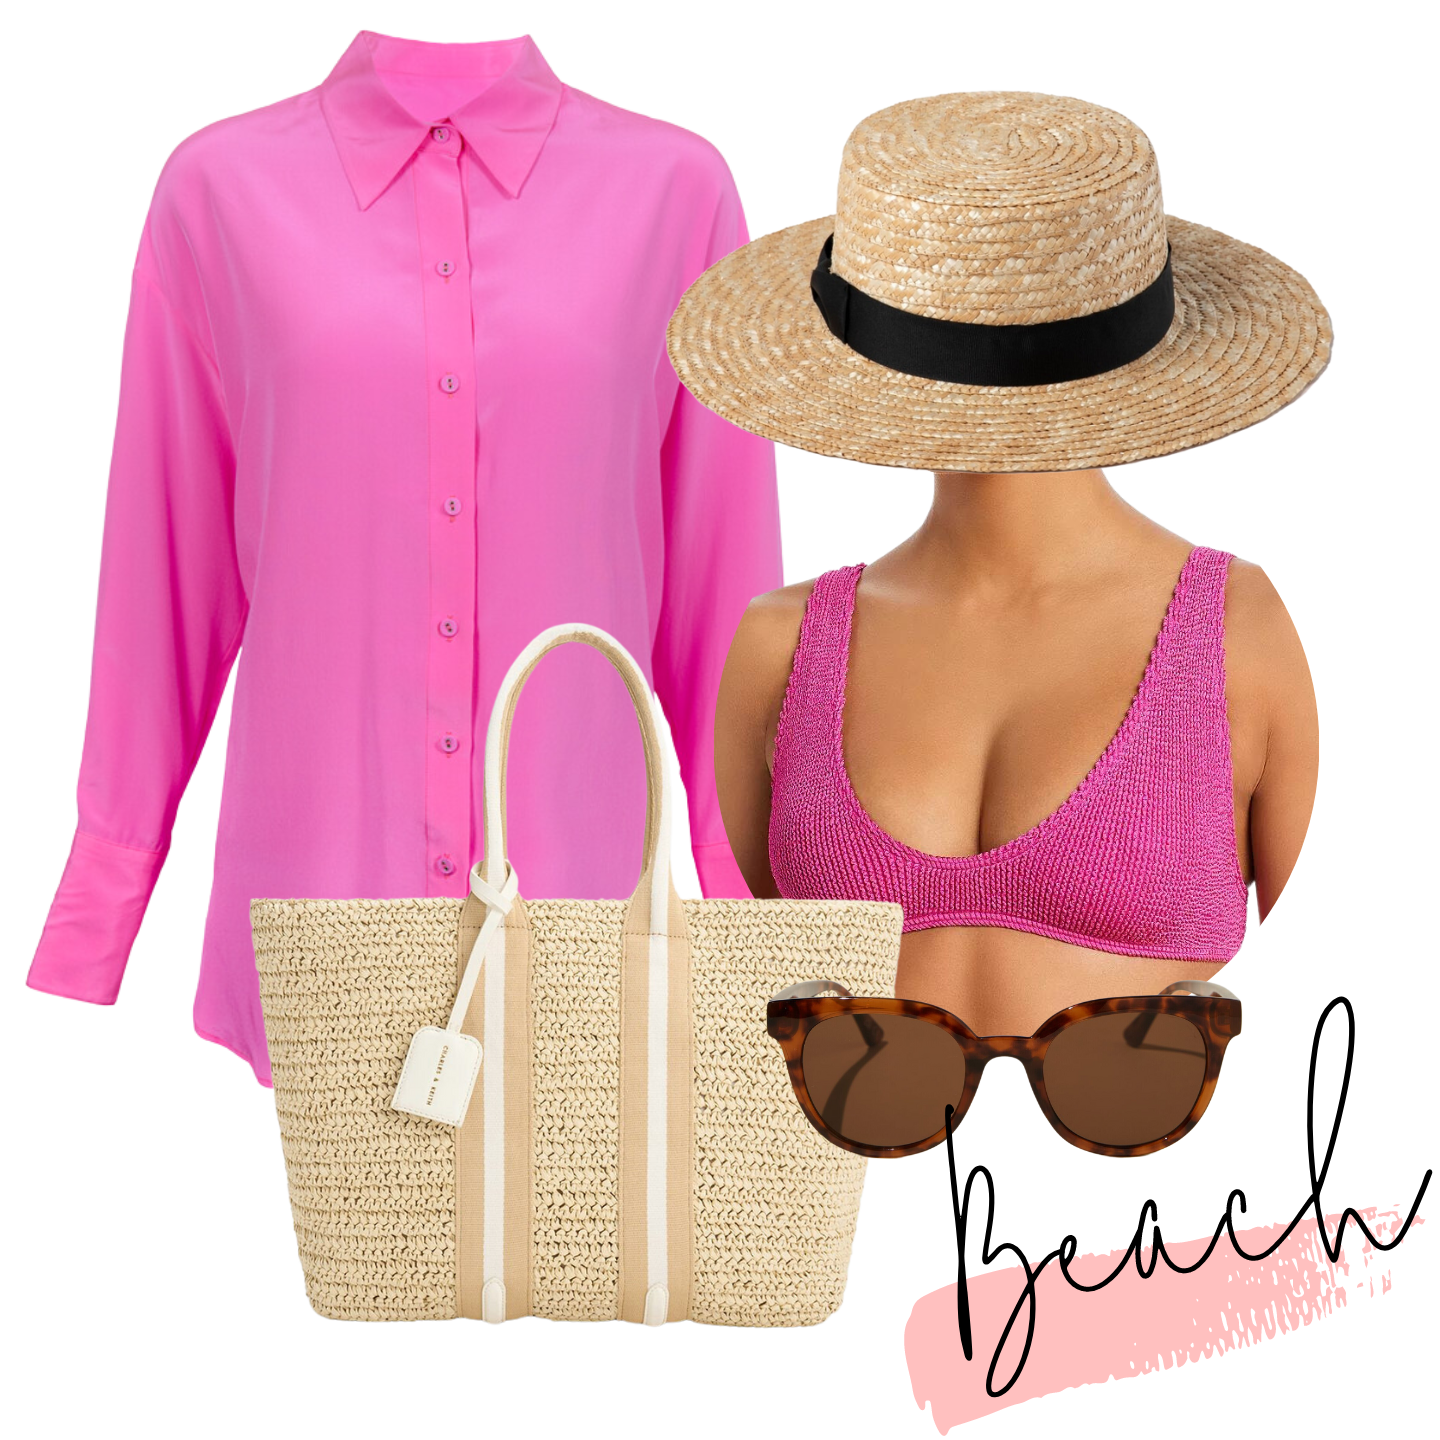 hong kong summer outfits ideas hot heat humid humidity lightweight style junk pool beach day bright fun coverup pink silk skorts krsv